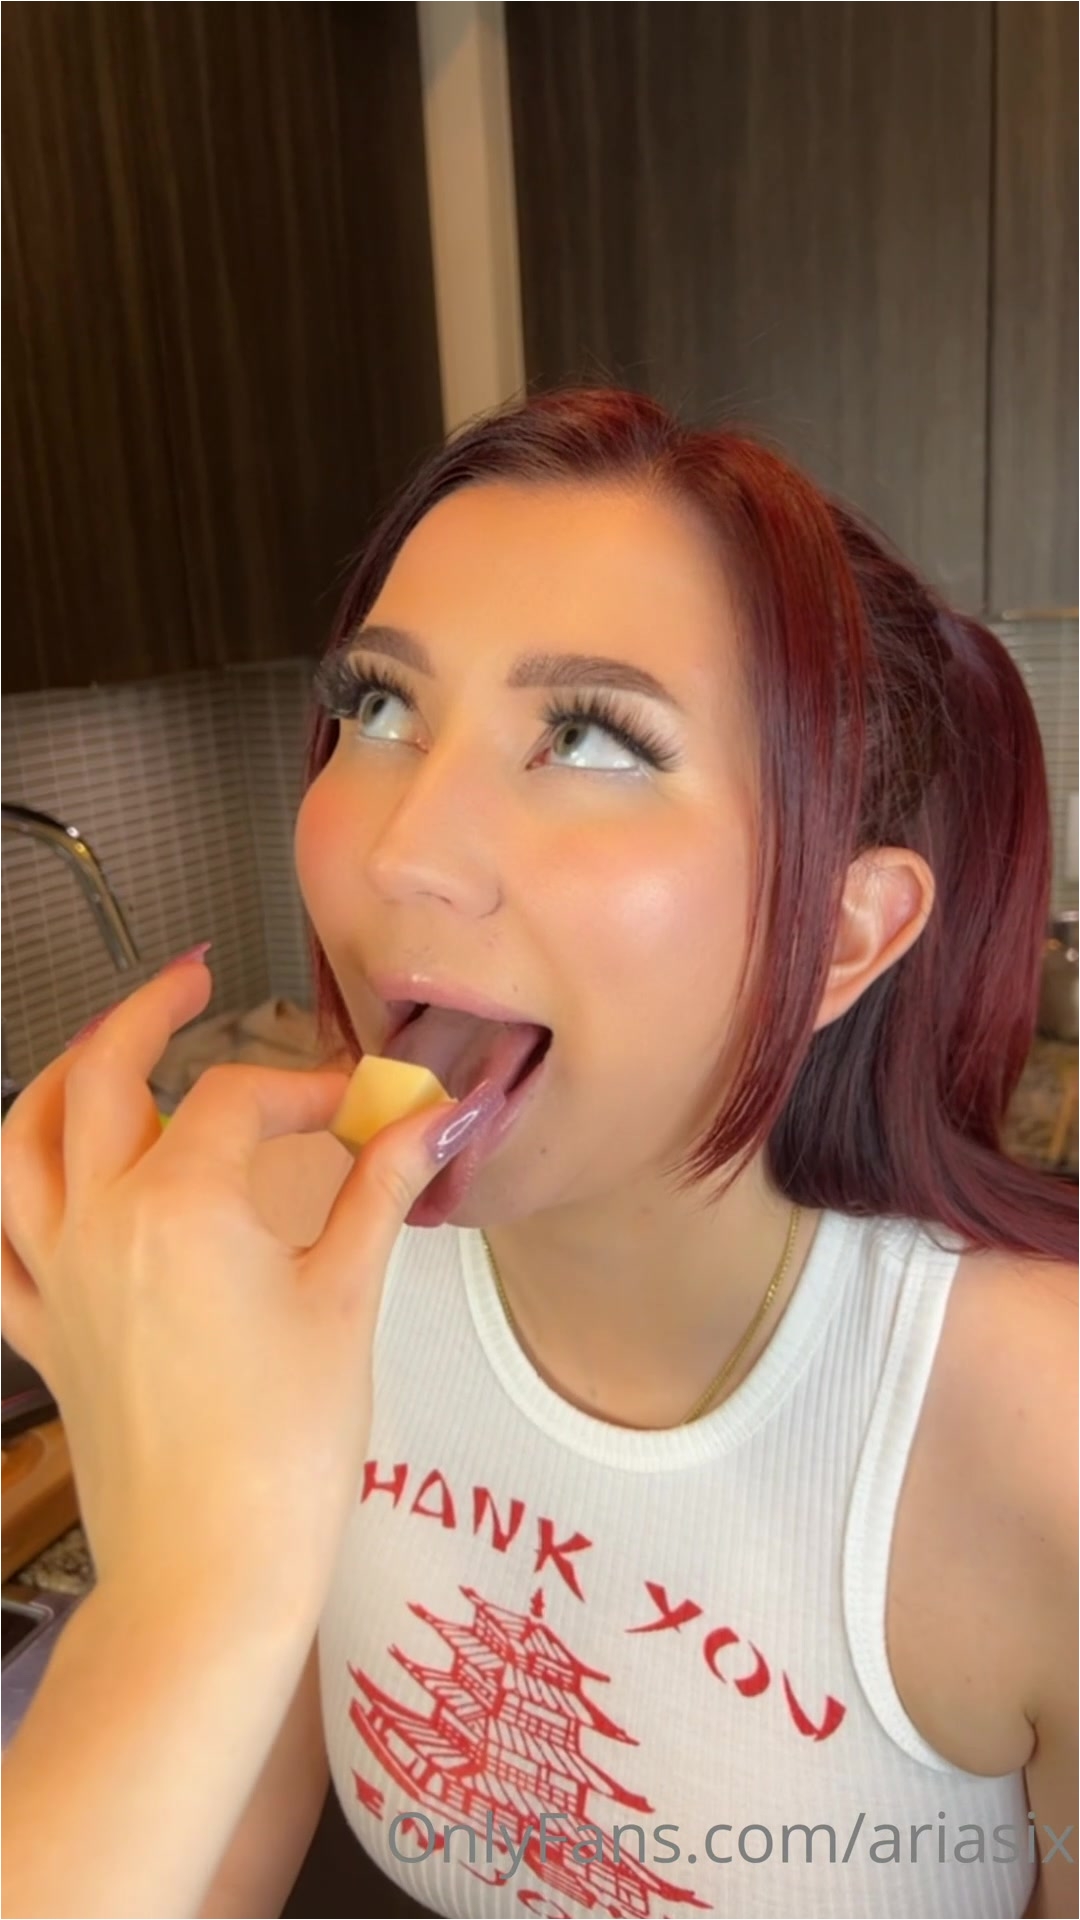 Aria Sixx - Sarahloves.Sarah And i Made a Sexy Cooking Video The Balls Tasted Great [UltraHD/2K 1920P]